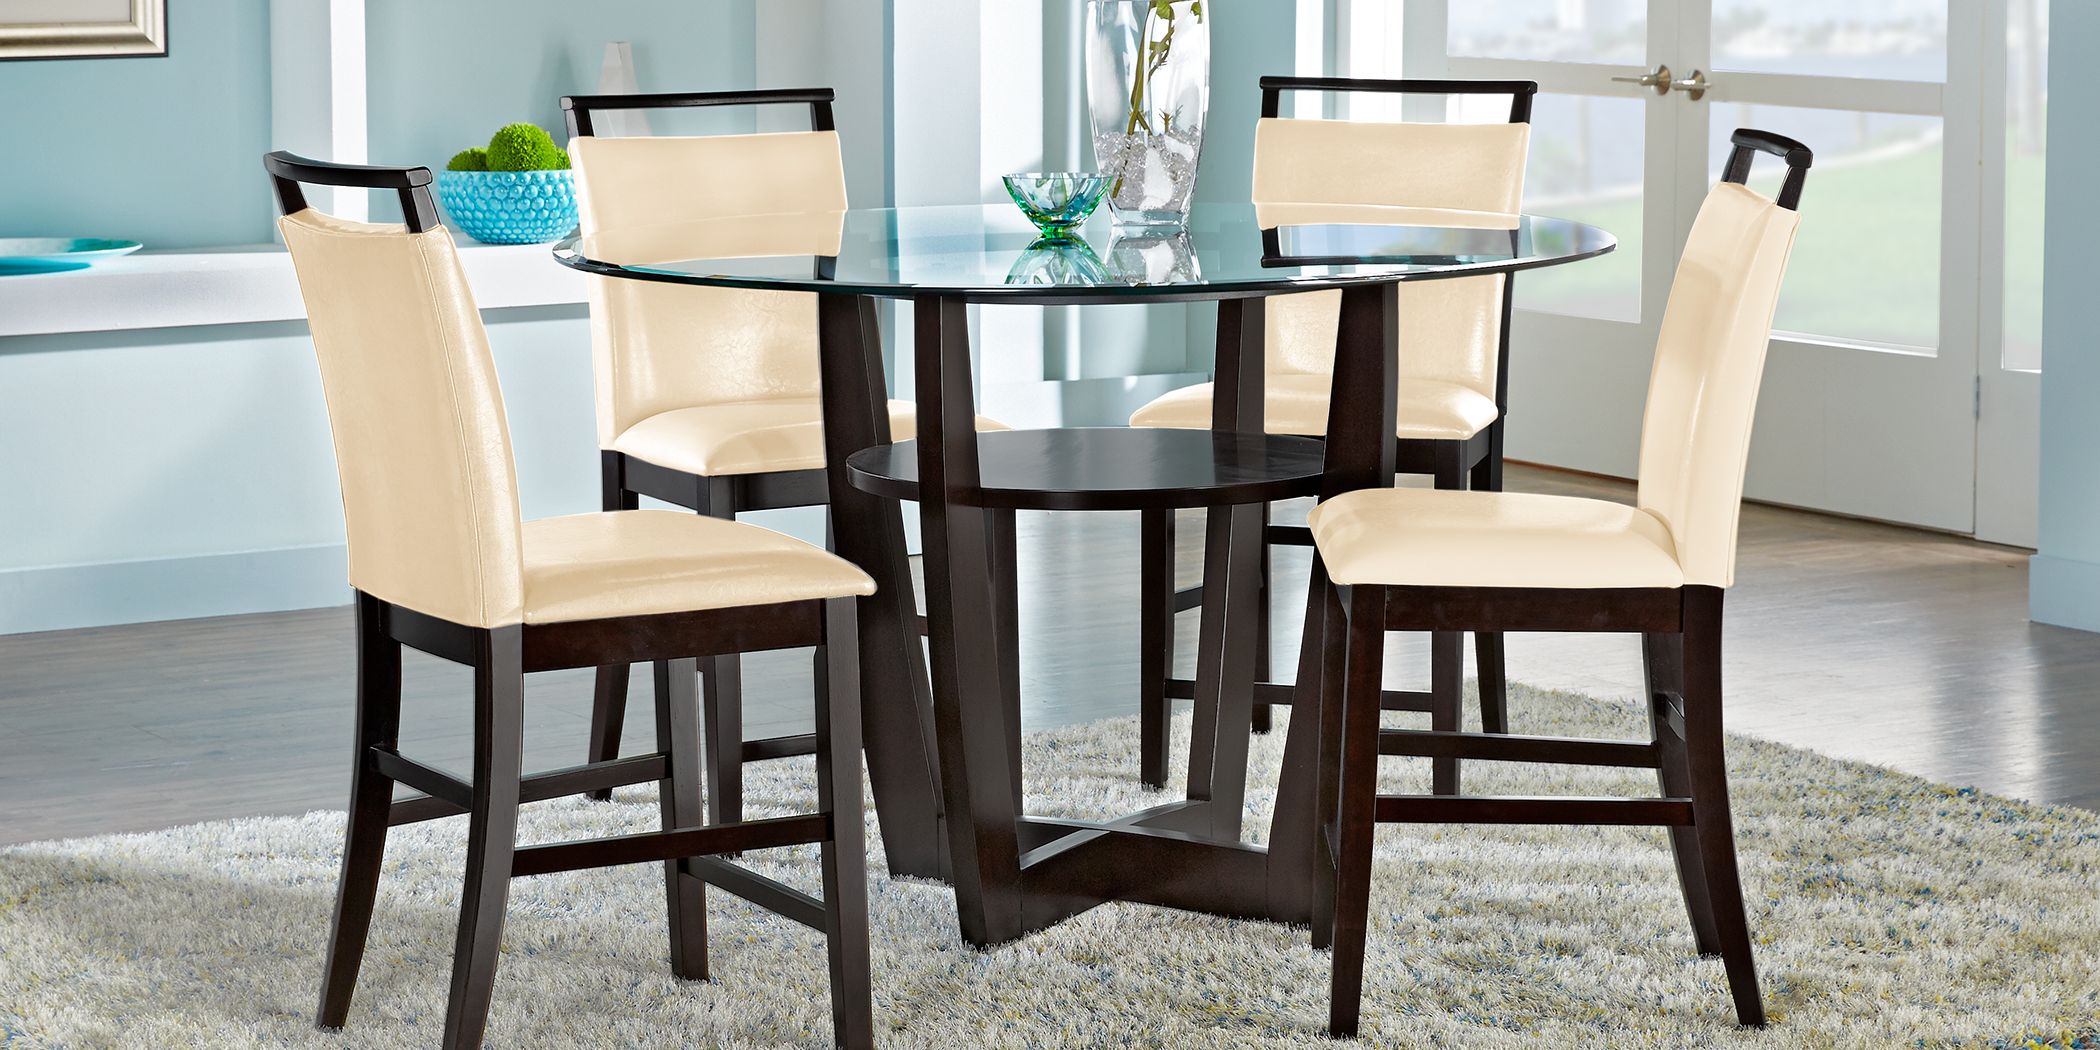 Glass Dining Table Sets, Tall Dining Room Tables